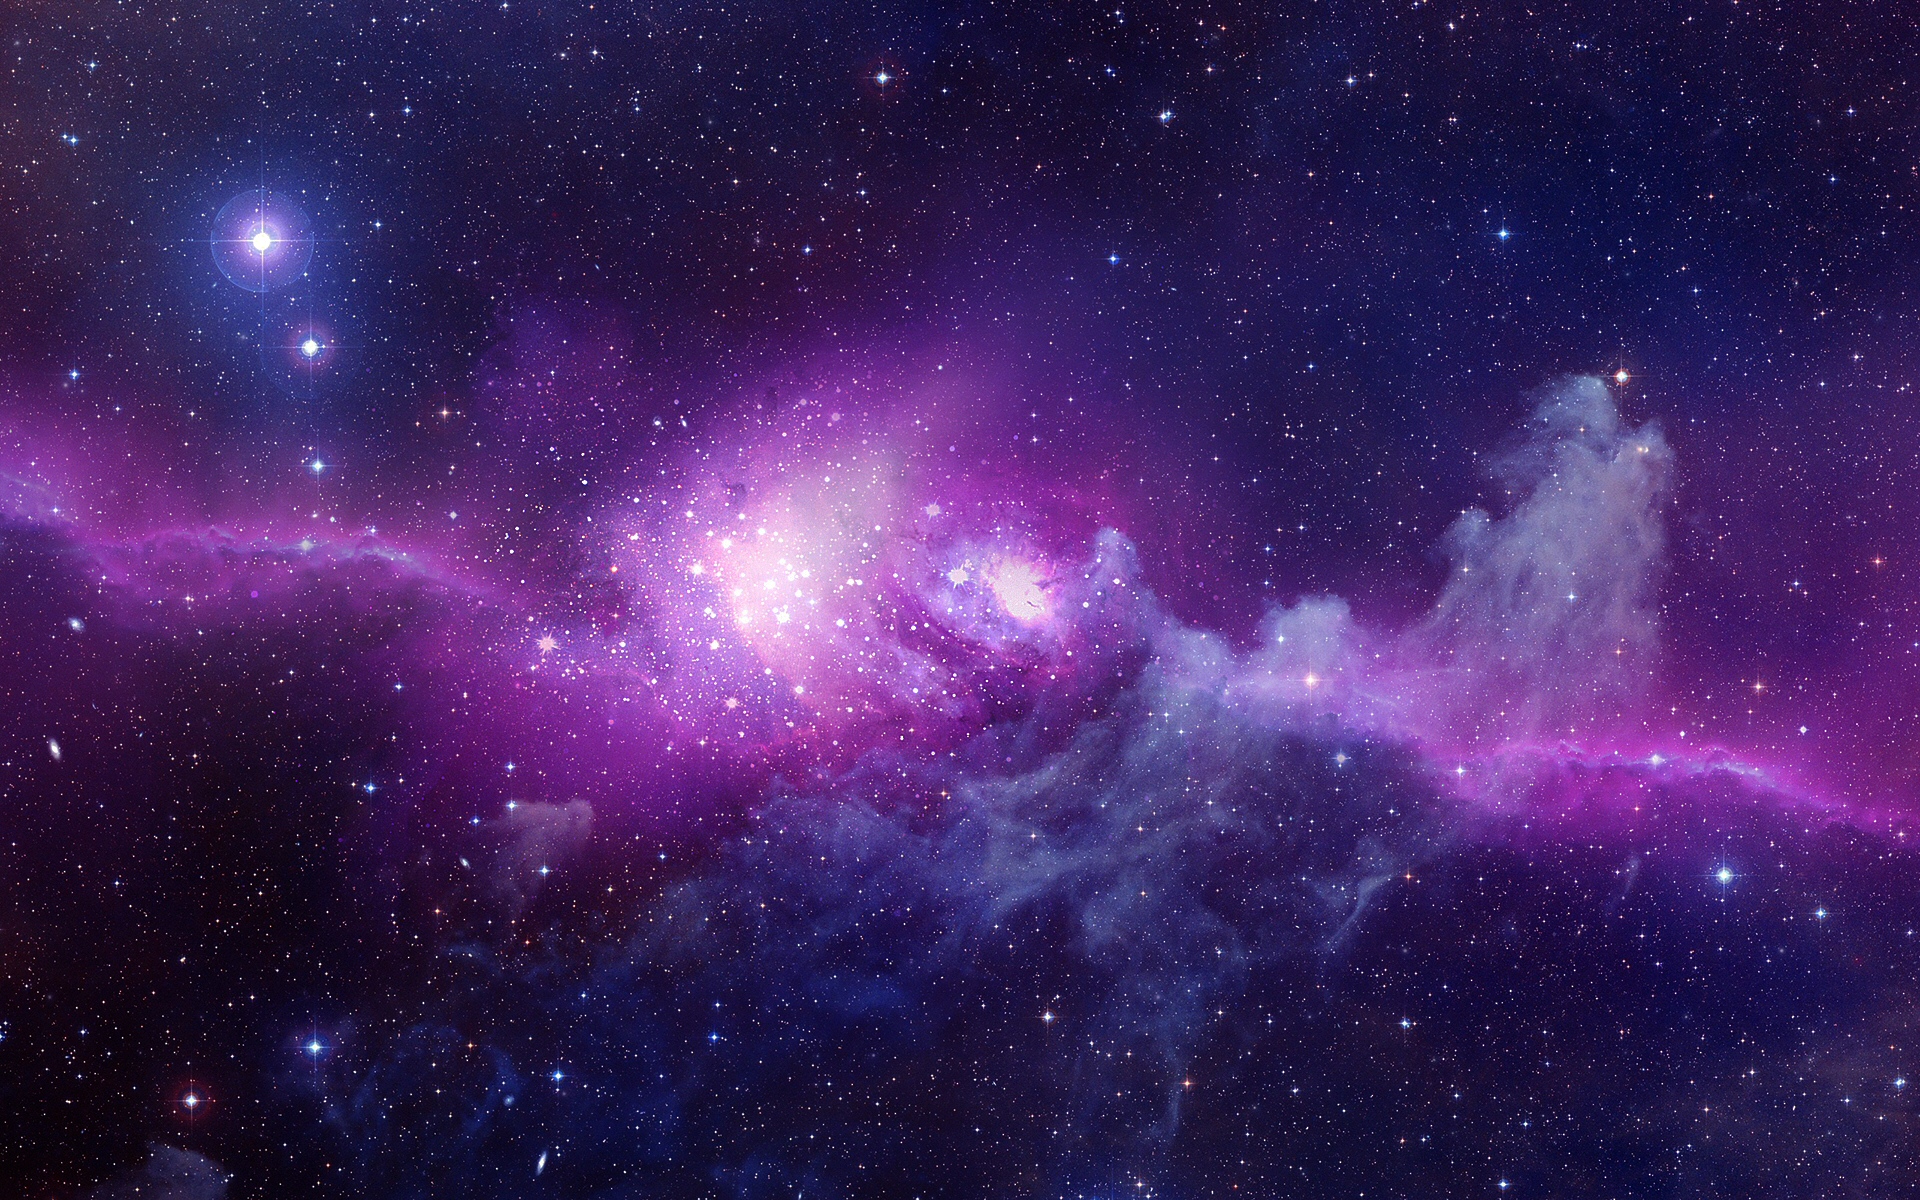 HD Cool Cosmic Wallpaper and Photo. HD Space Wallpaper